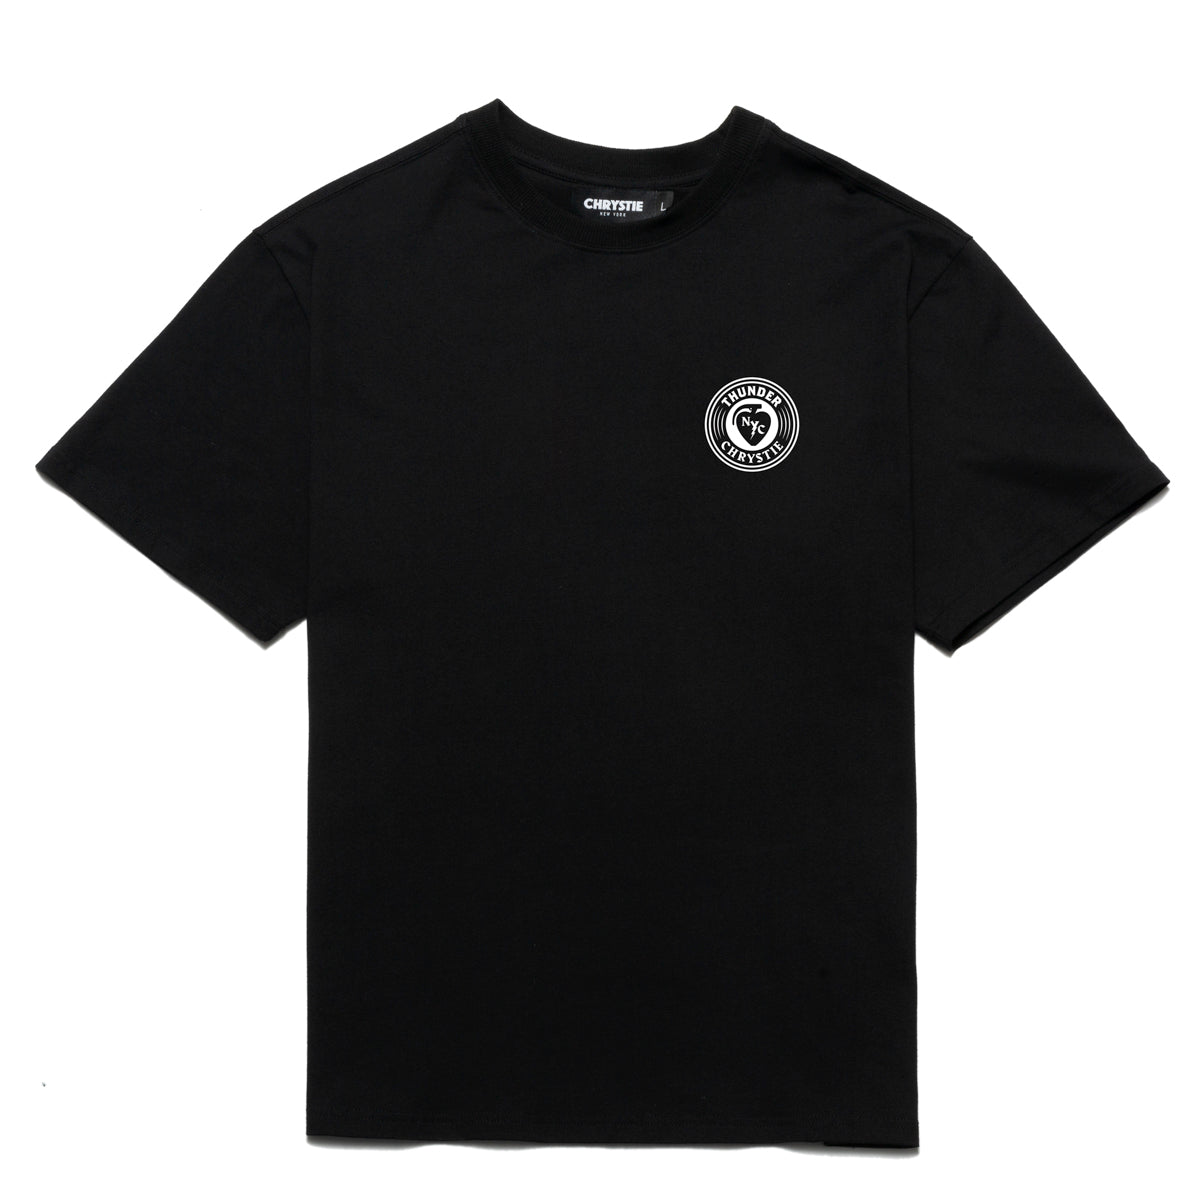 Load image into Gallery viewer, Chrystie x Thunder Circle logo Tee BLACK